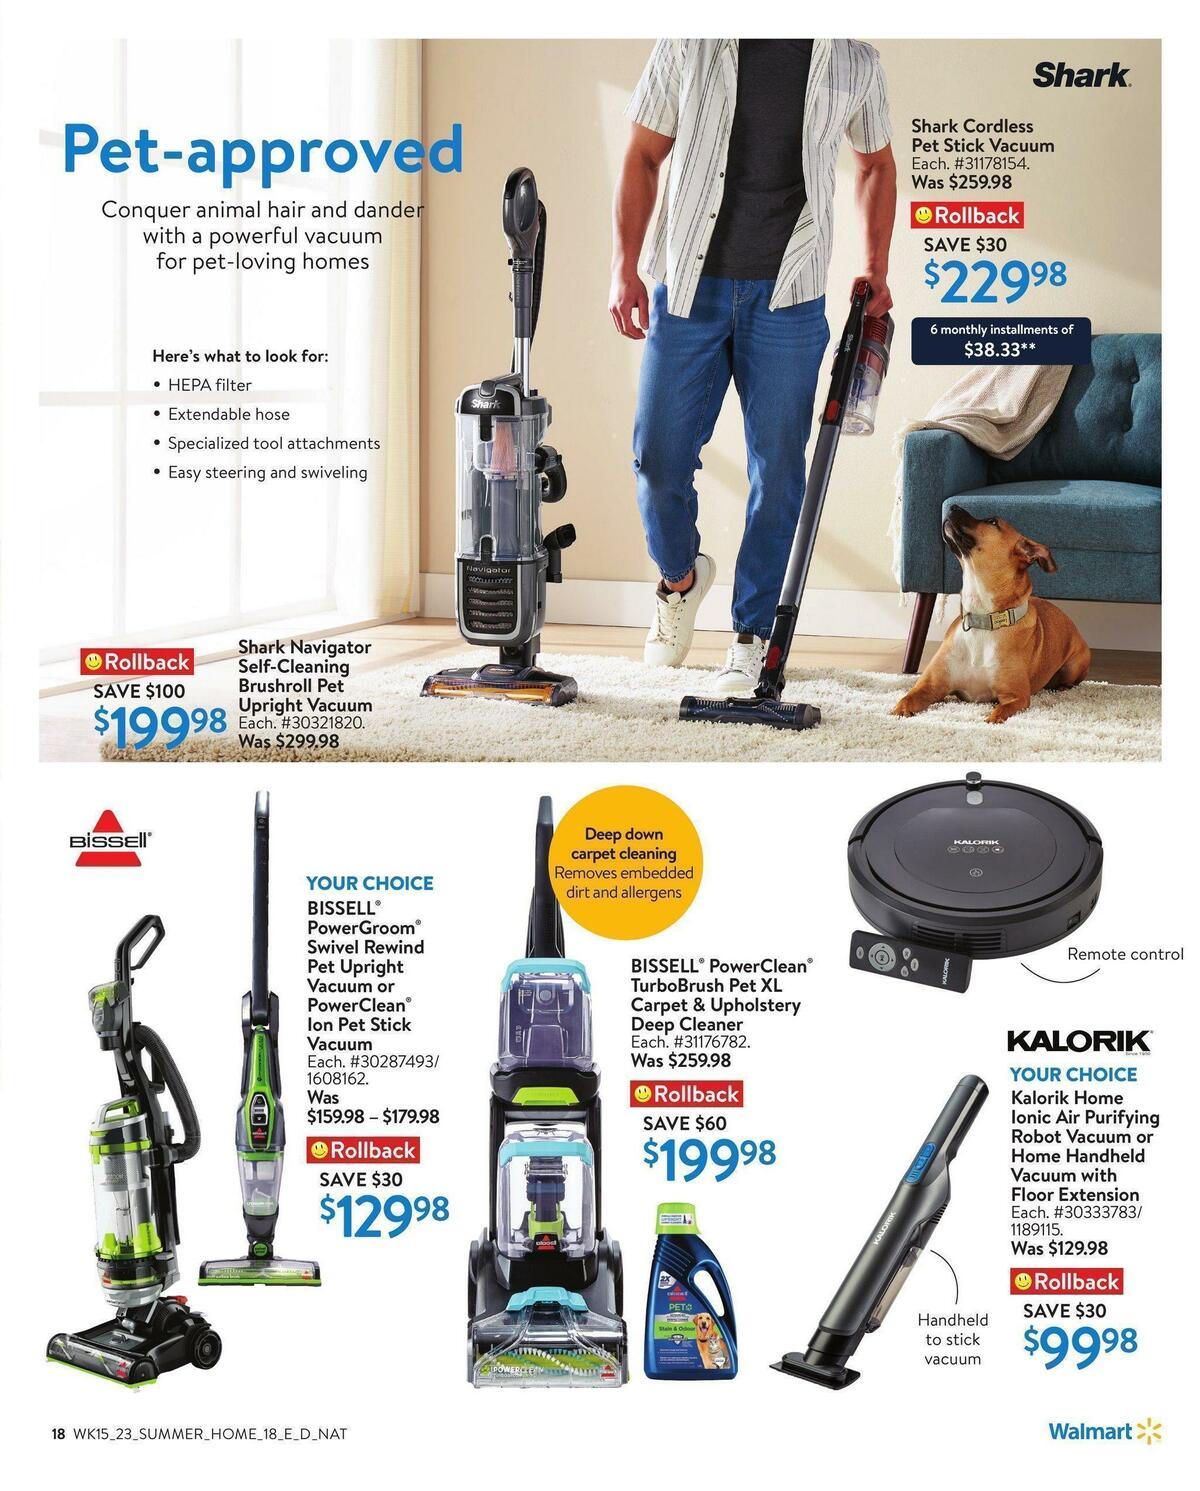 Walmart Summer Home Digest Flyer from May 4